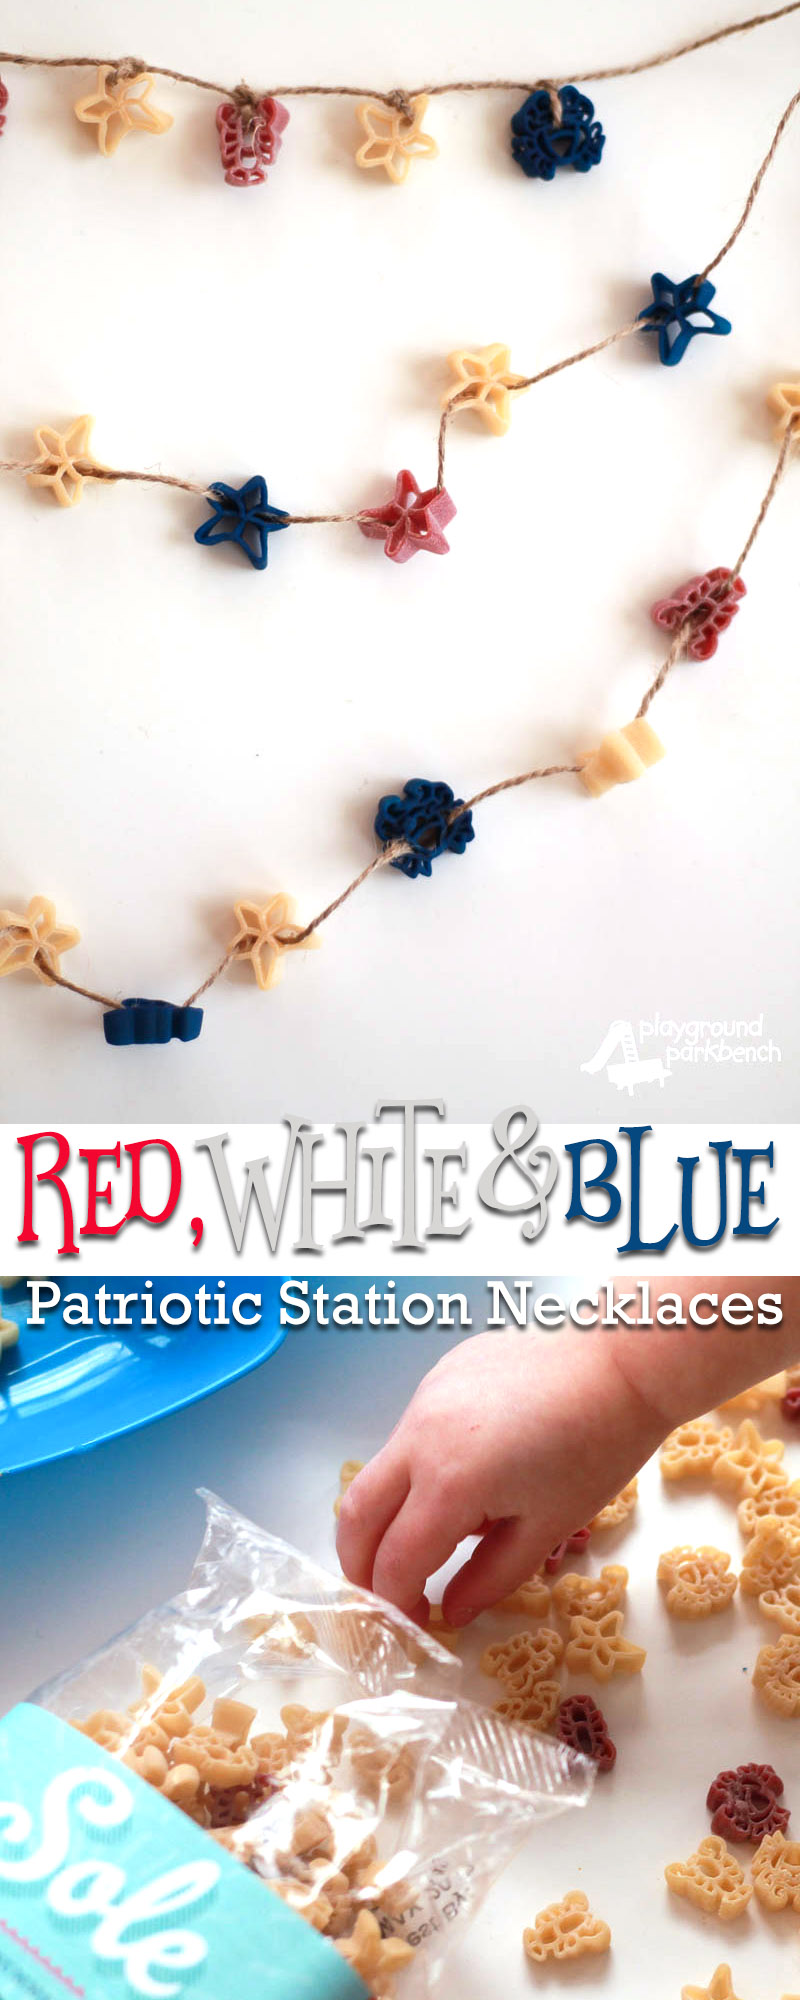 This patriotic craft for kids is perfect for all your summer festivities. Set it up as a kids activity table, or make them in advance as party favors. Whether for your Memorial Day picnic, July 4th BBQ, a Lobster Bake or even just a craft at summer camp, these Red White and Blue necklaces featuring sea-shaped pasta are sure to be a hit! | 4th of July | Memorial Day | Summer | Kids Activities | Kids Crafts | DIY | Toddler | Preschool | Colored Pasta |